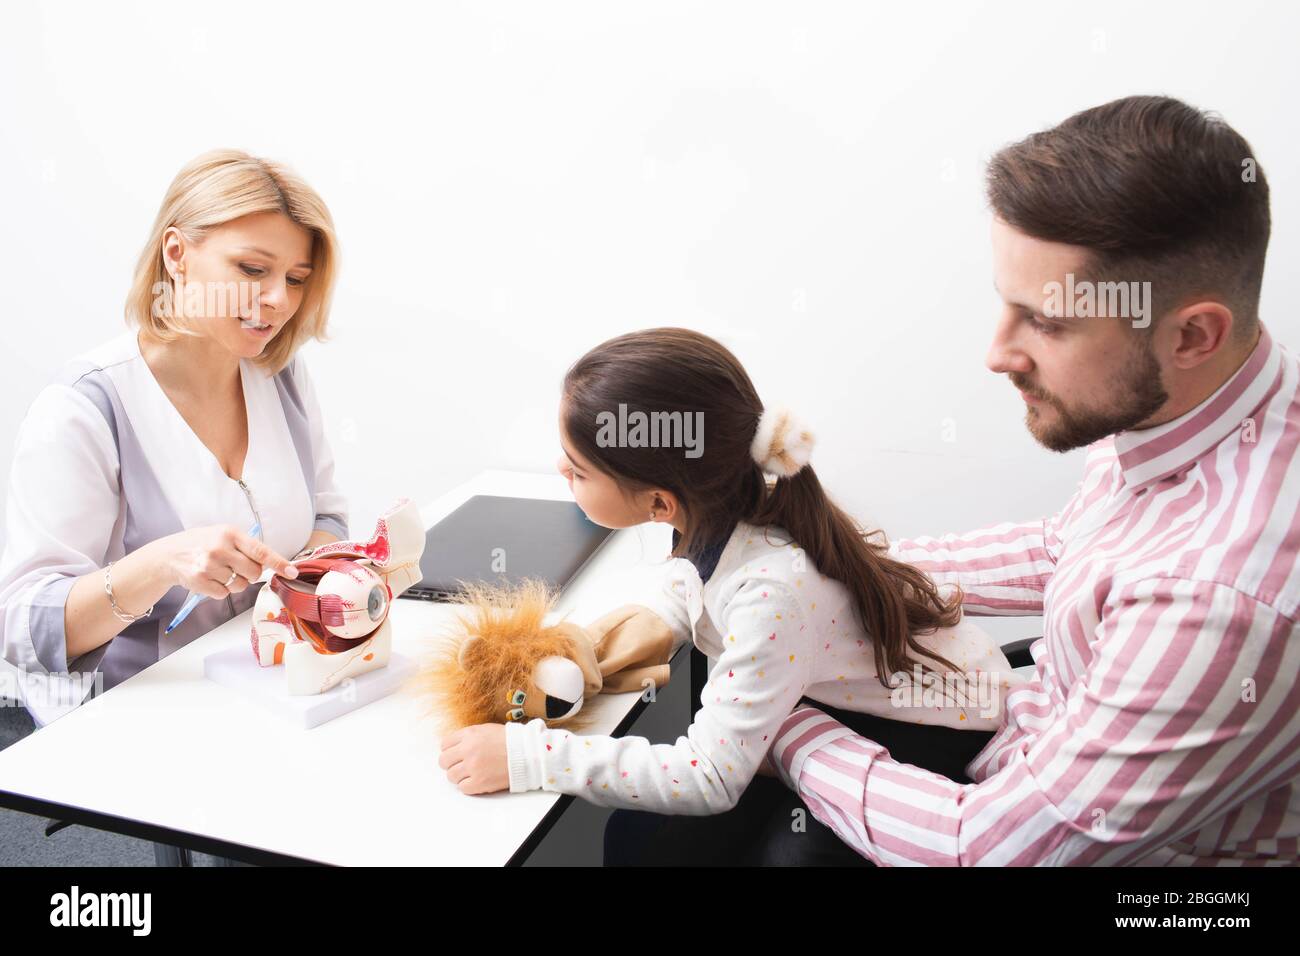 Woman optometrist shows a model of human eye to a little girl patient and her dad in ophthalmologic office. Diagnosis of vision in children Stock Photo